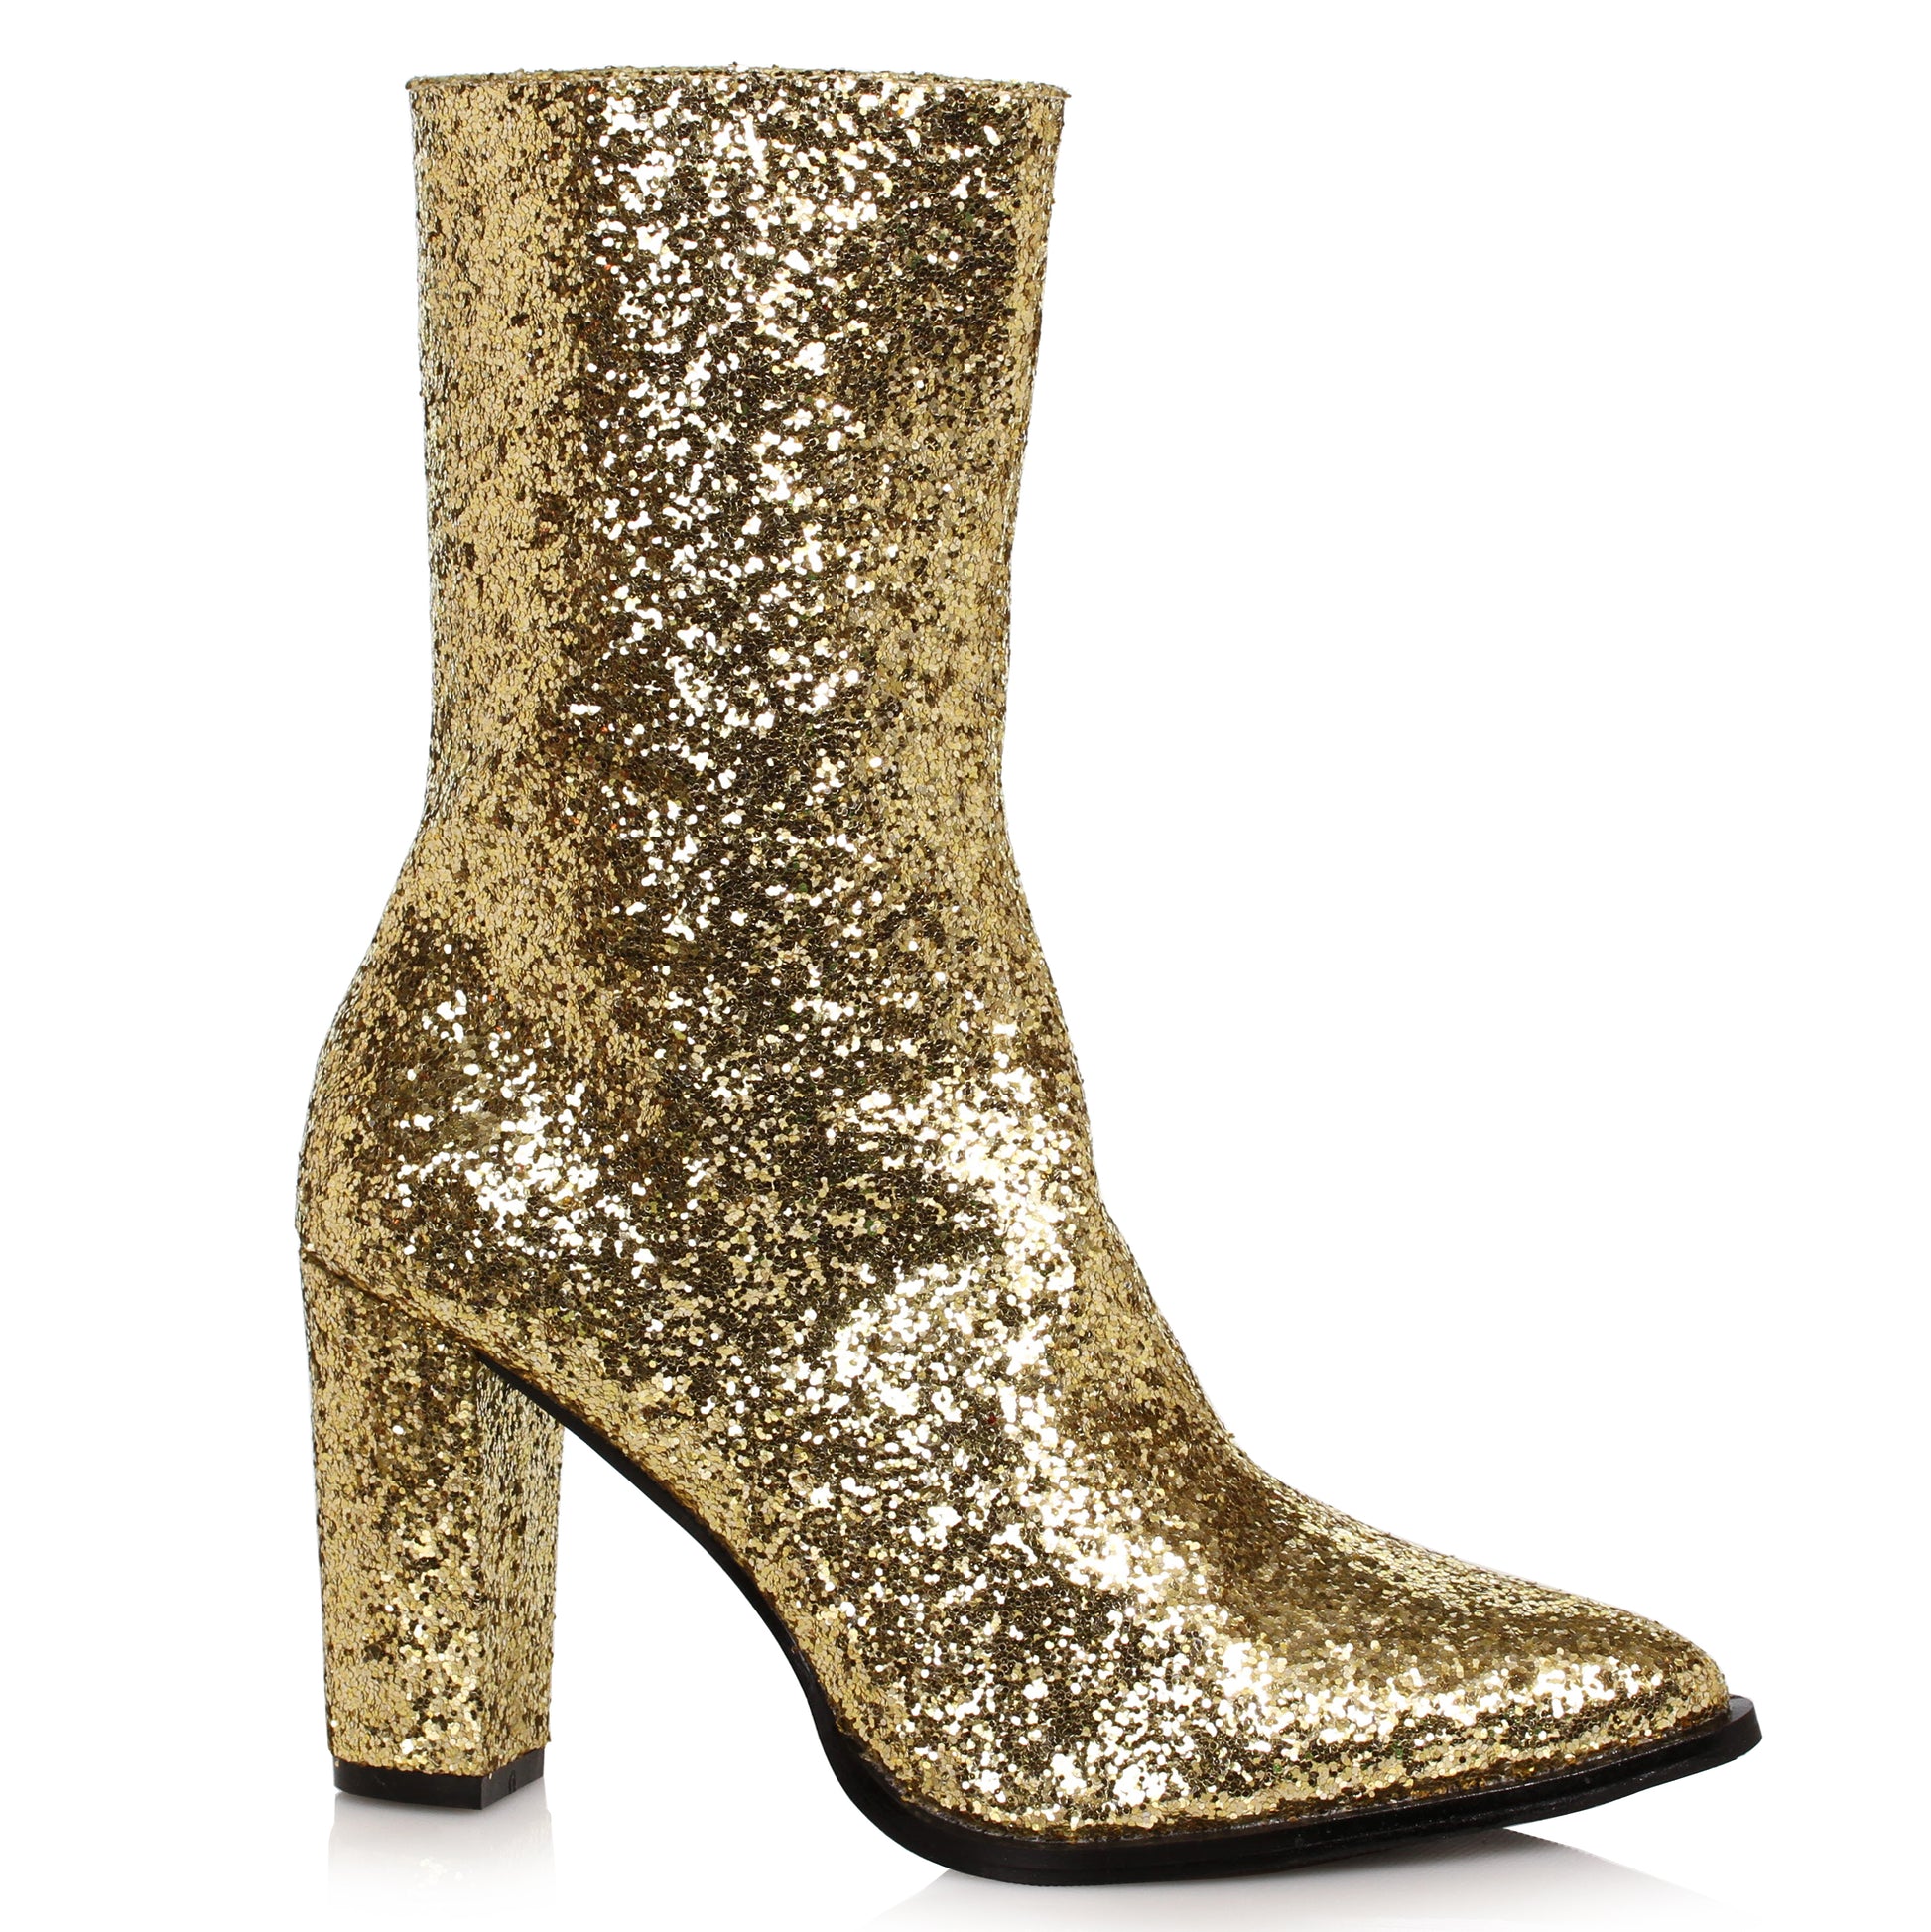 325-FRESCA Ellie Shoes 3" Womens Glitter Gogo Calf Boot ANKLE BOOT 3 INCH HEEL